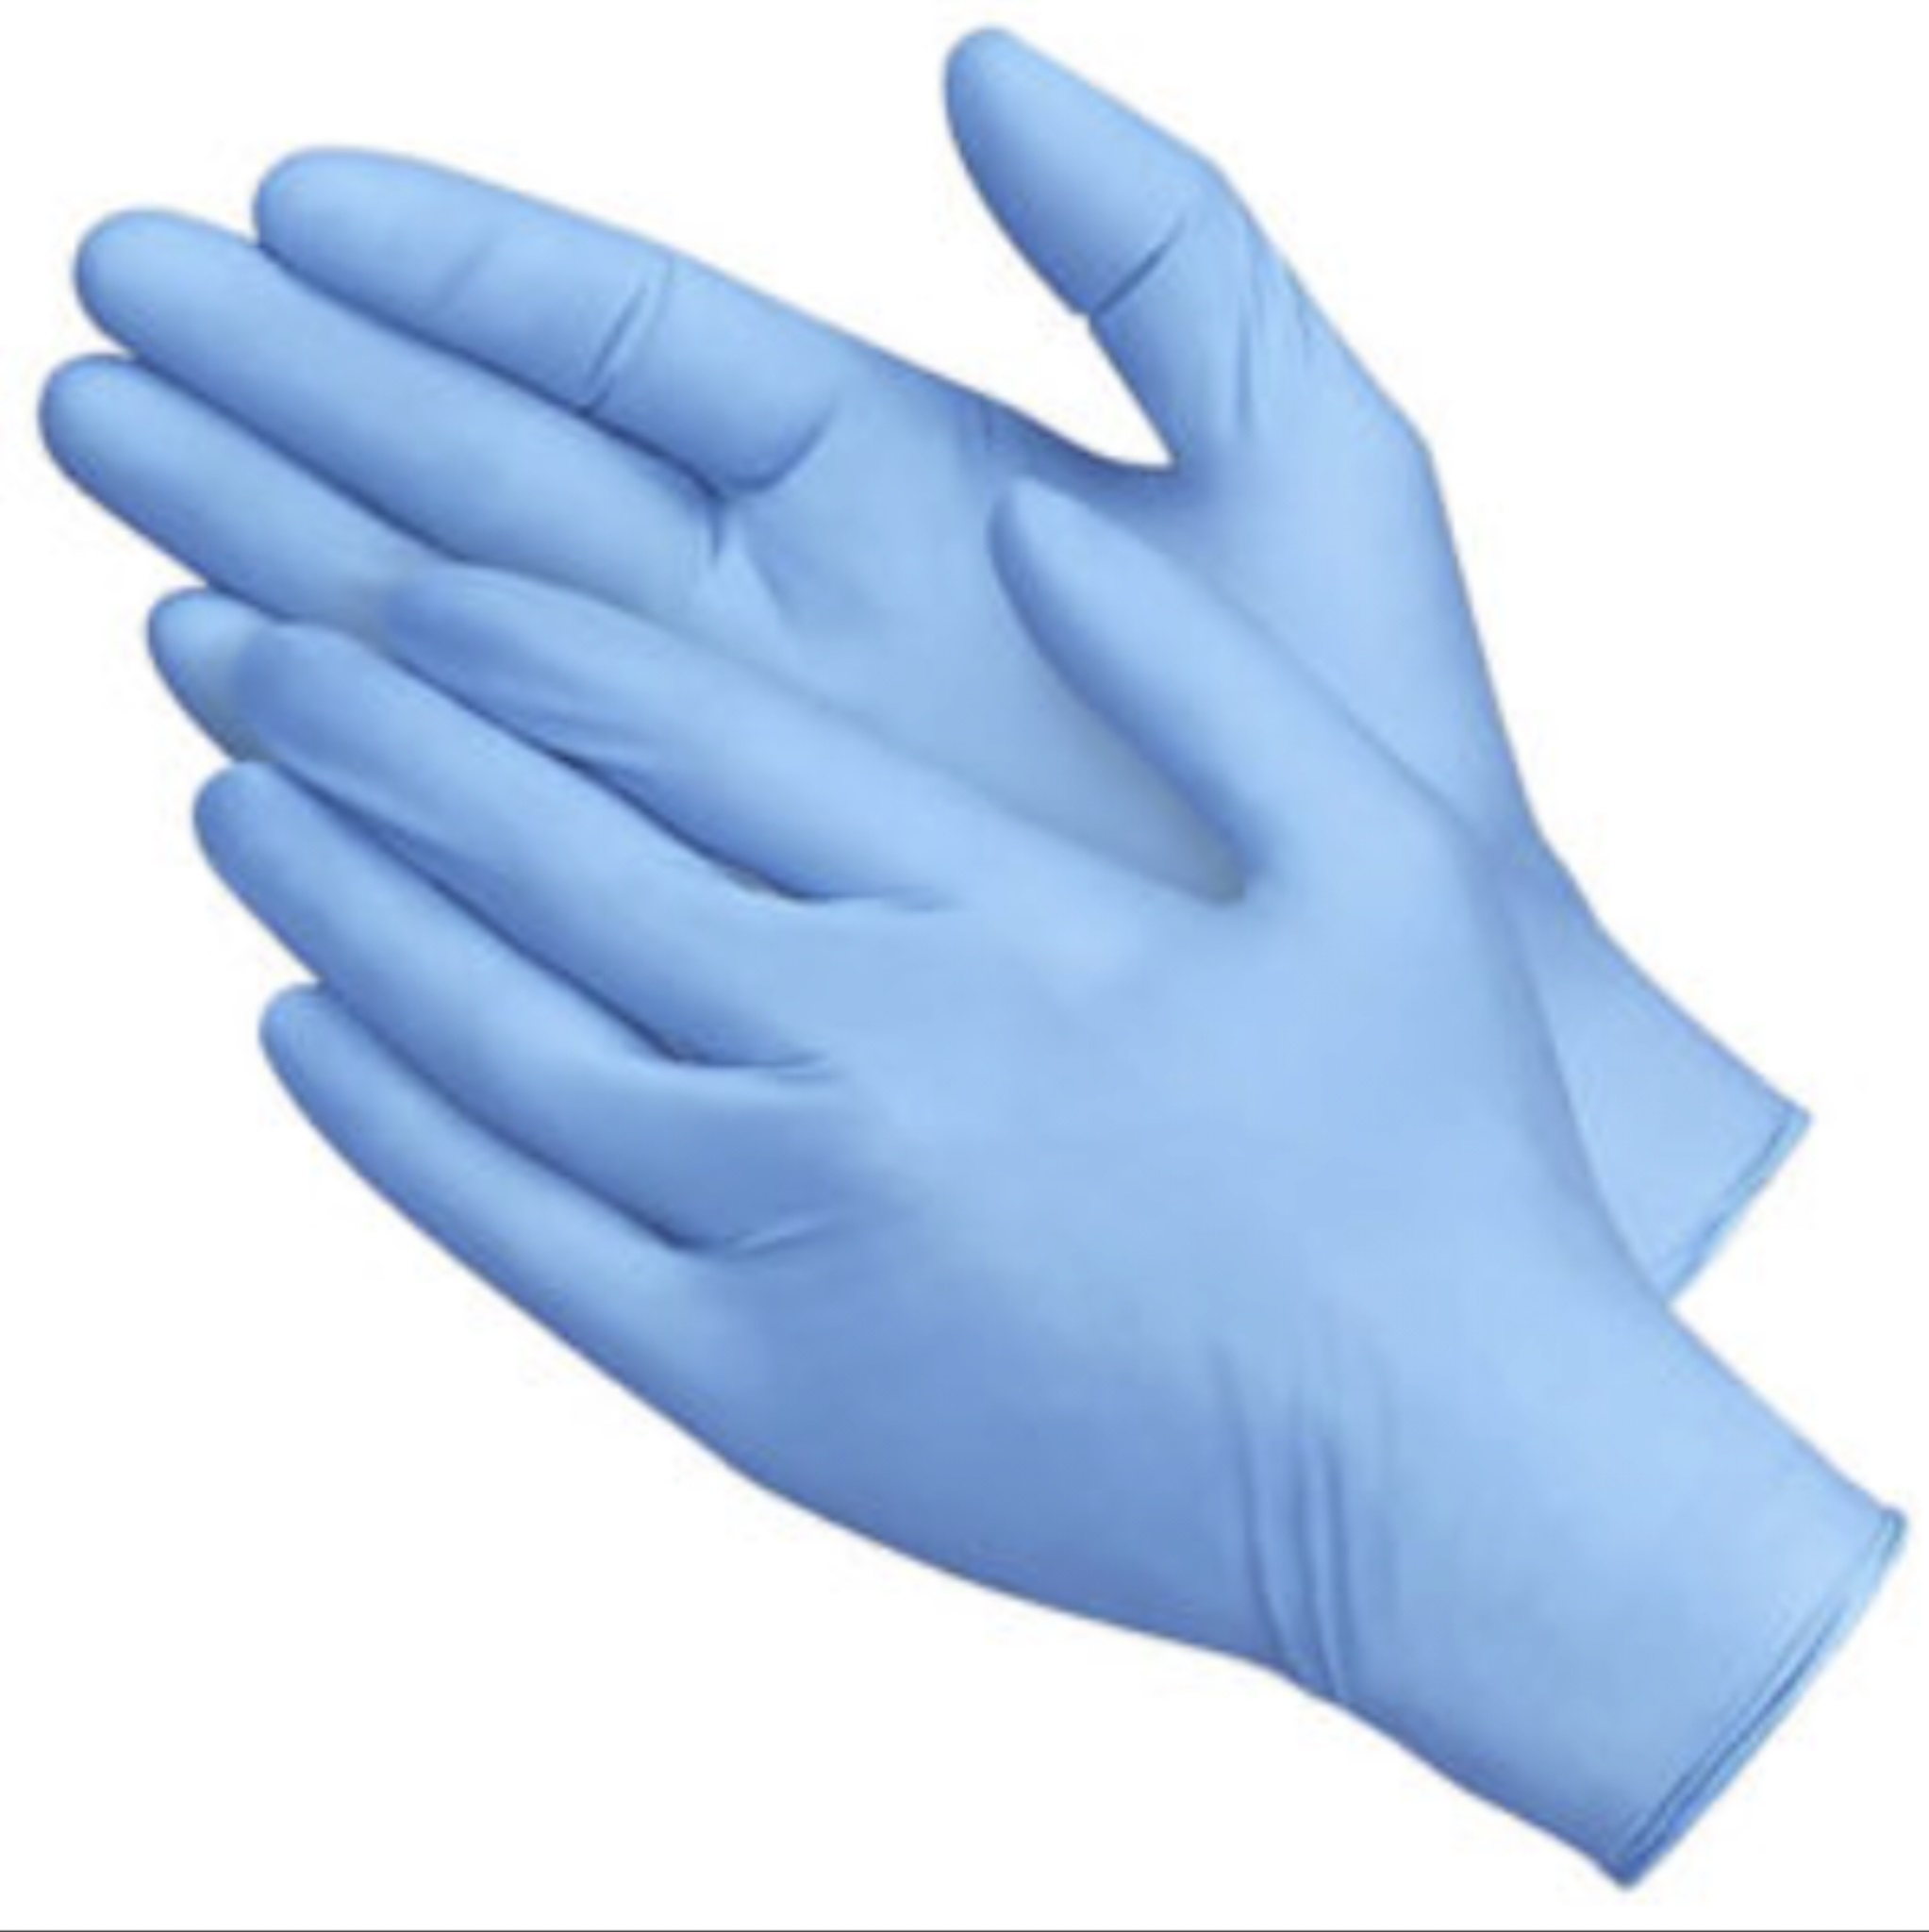 Gloves Blue Nitrile Powder Free Large 3mil 10/100ct X34 - Sold by EA